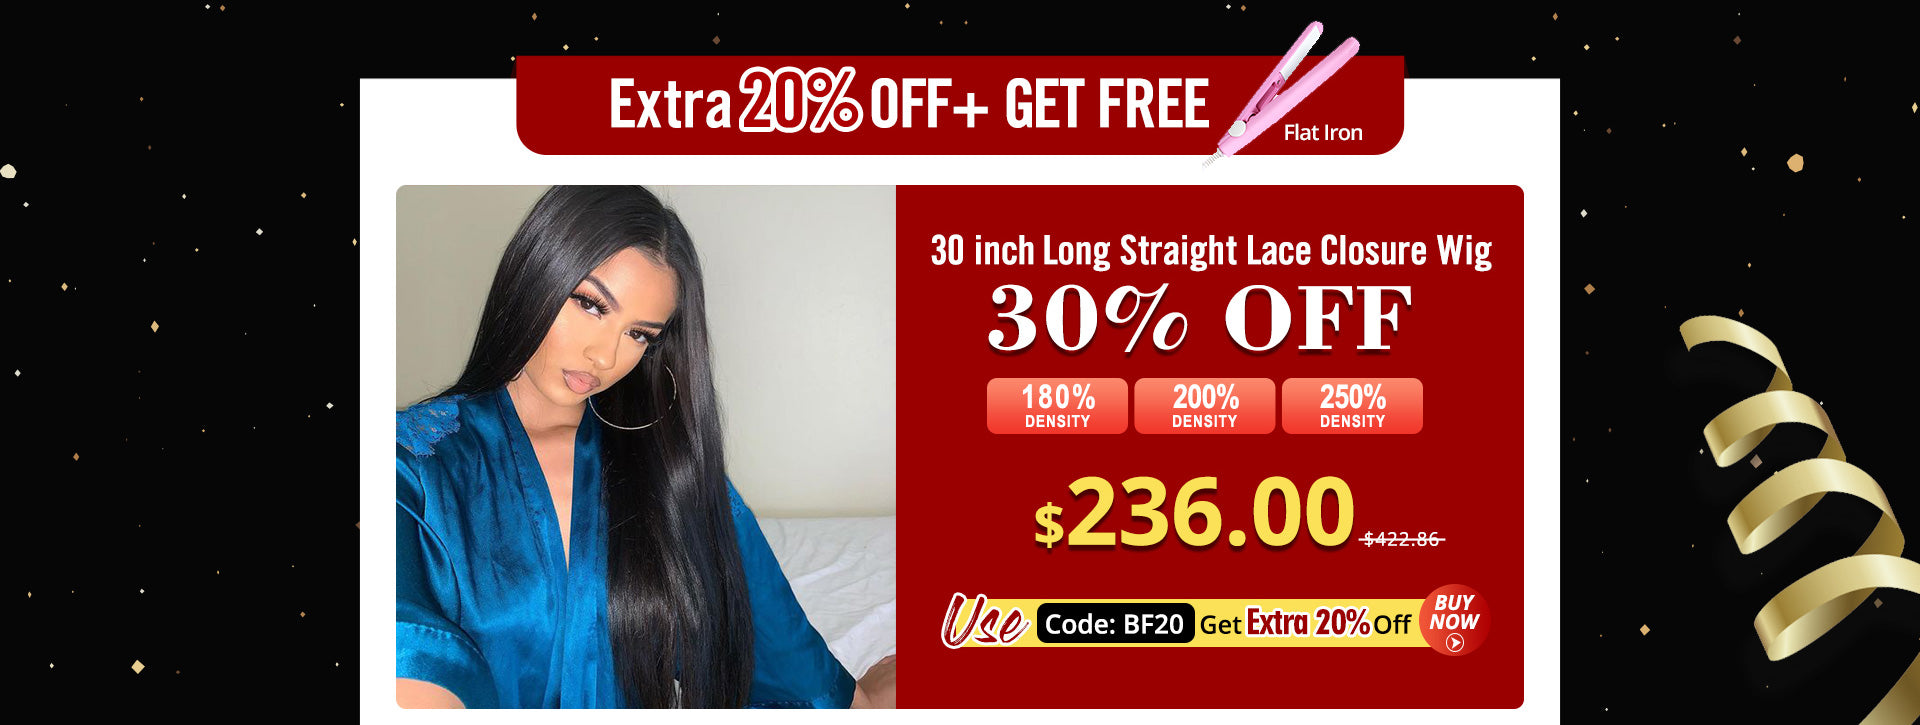 30 Inch Long Straight Lace Closure Wig